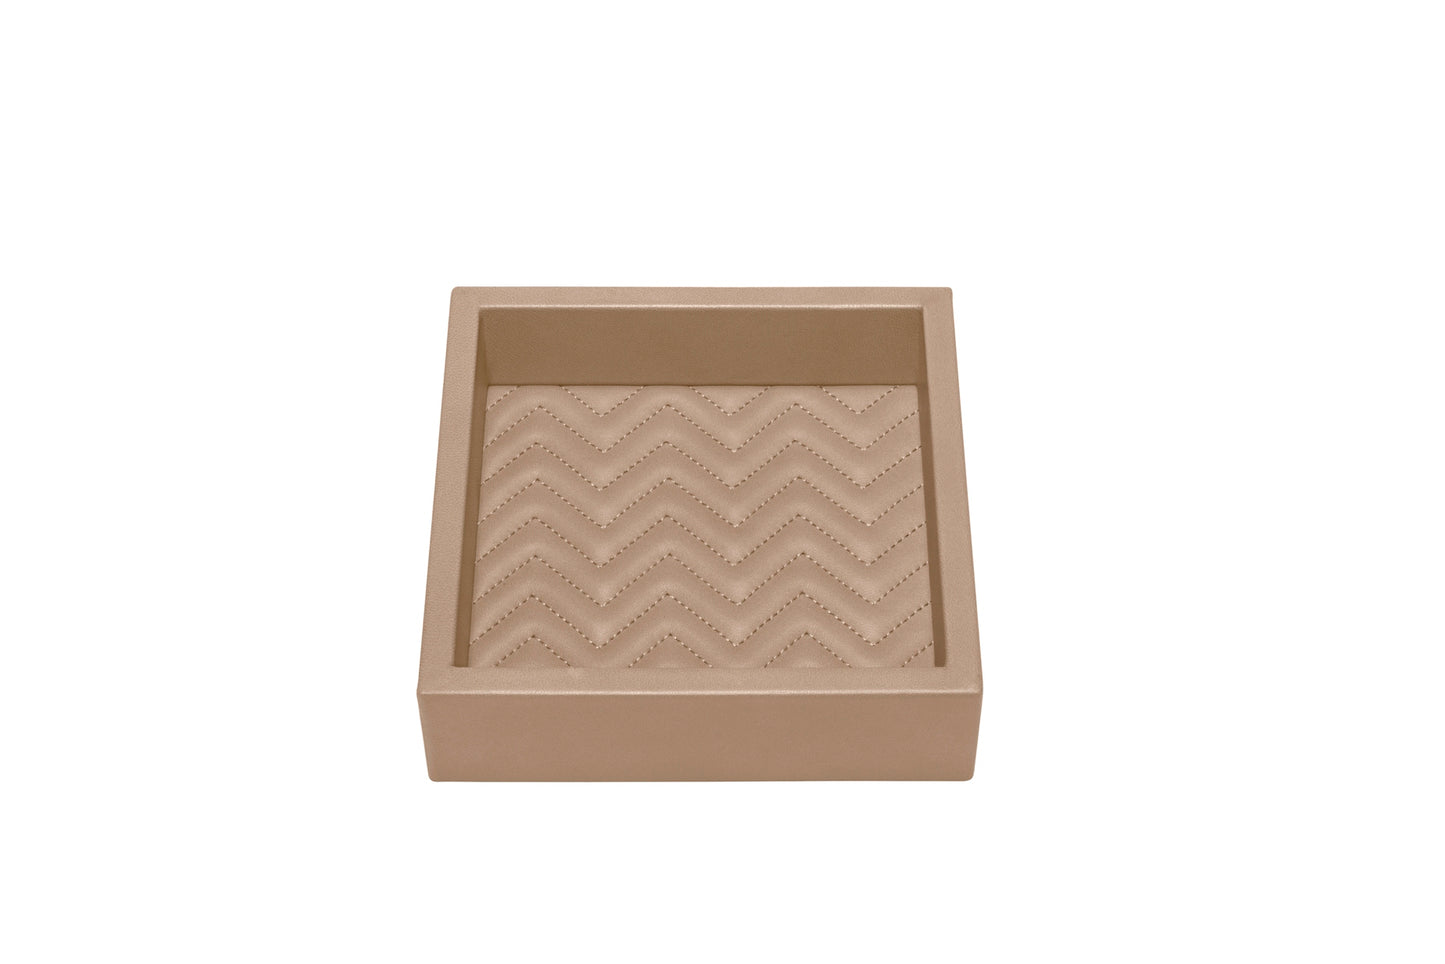 Riviere Febe Leather Herringbone Square Valet Tray | Padded Quilted Herringbone Lining | Ideal for Yacht Decor | Available at 2Jour Concierge, #1 luxury high-end gift & lifestyle shop